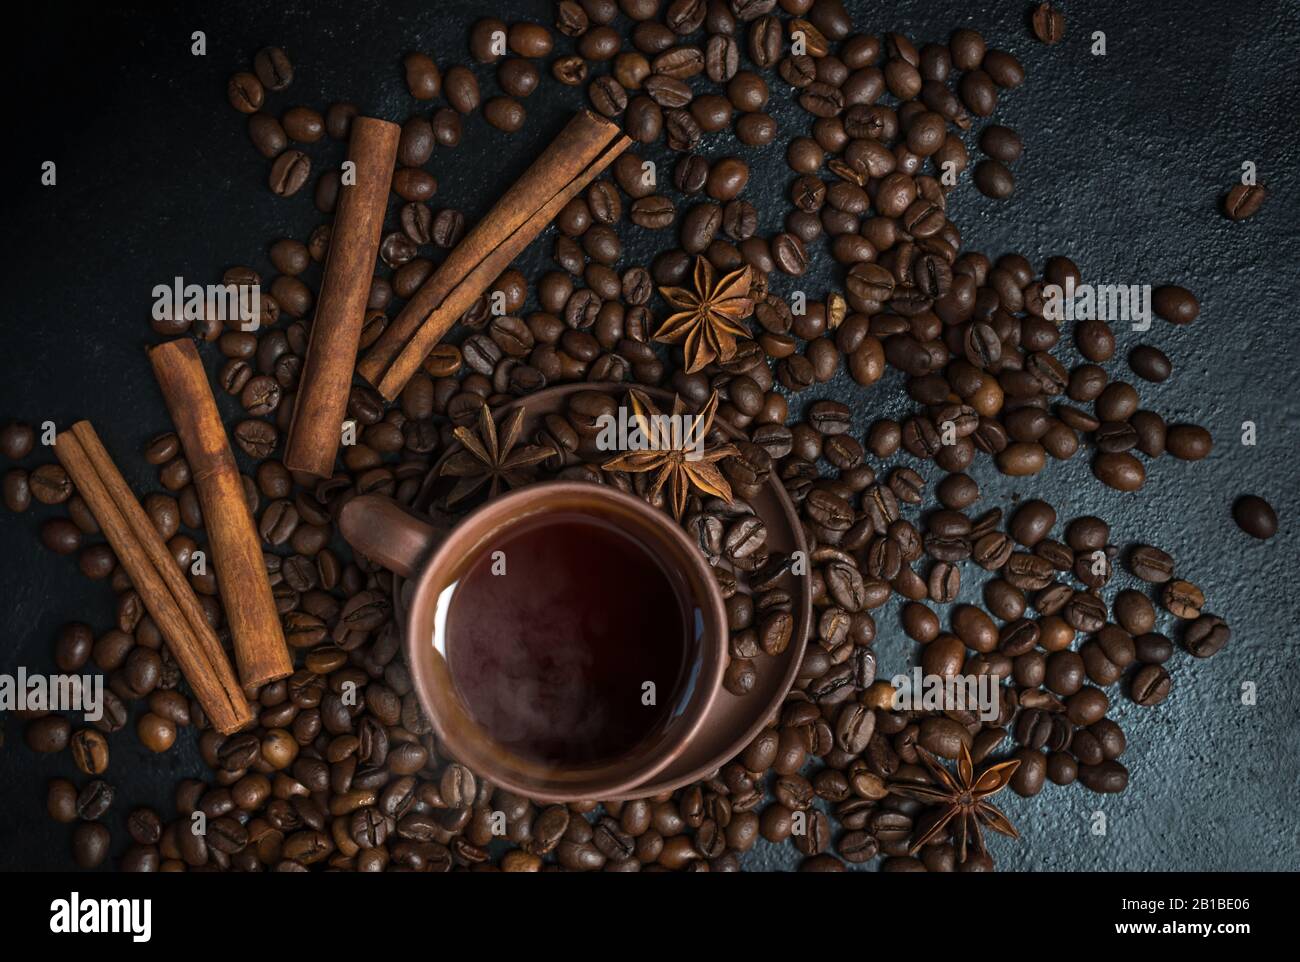 Coffee. Roasted coffee beans background. Coffee cup and beans on old kitchen table. Top view with copyspace for your text. Кофе. Кофейные зерна. Stock Photo